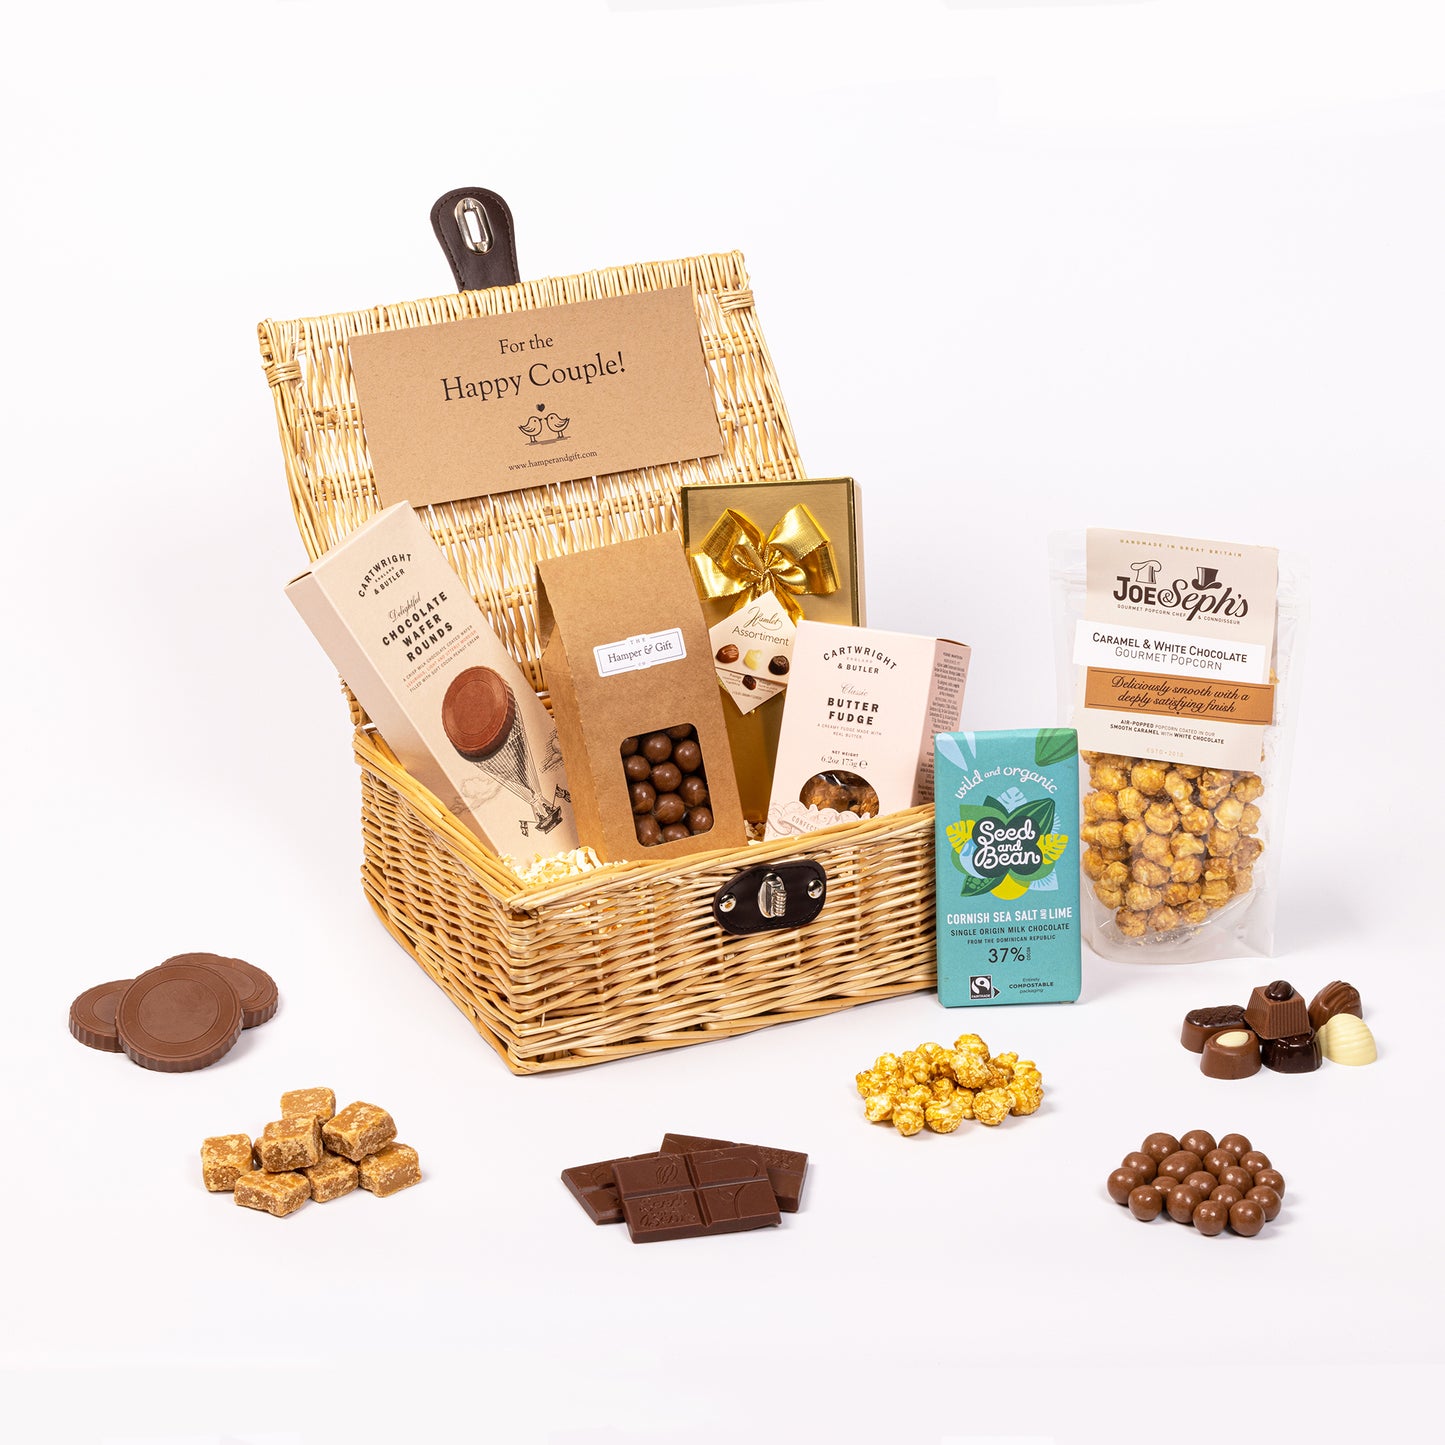 Happy Couple Chocolate & Fudge Hamper filled with a variety of chocolate, fudge, biscuit and gourmet popcorn